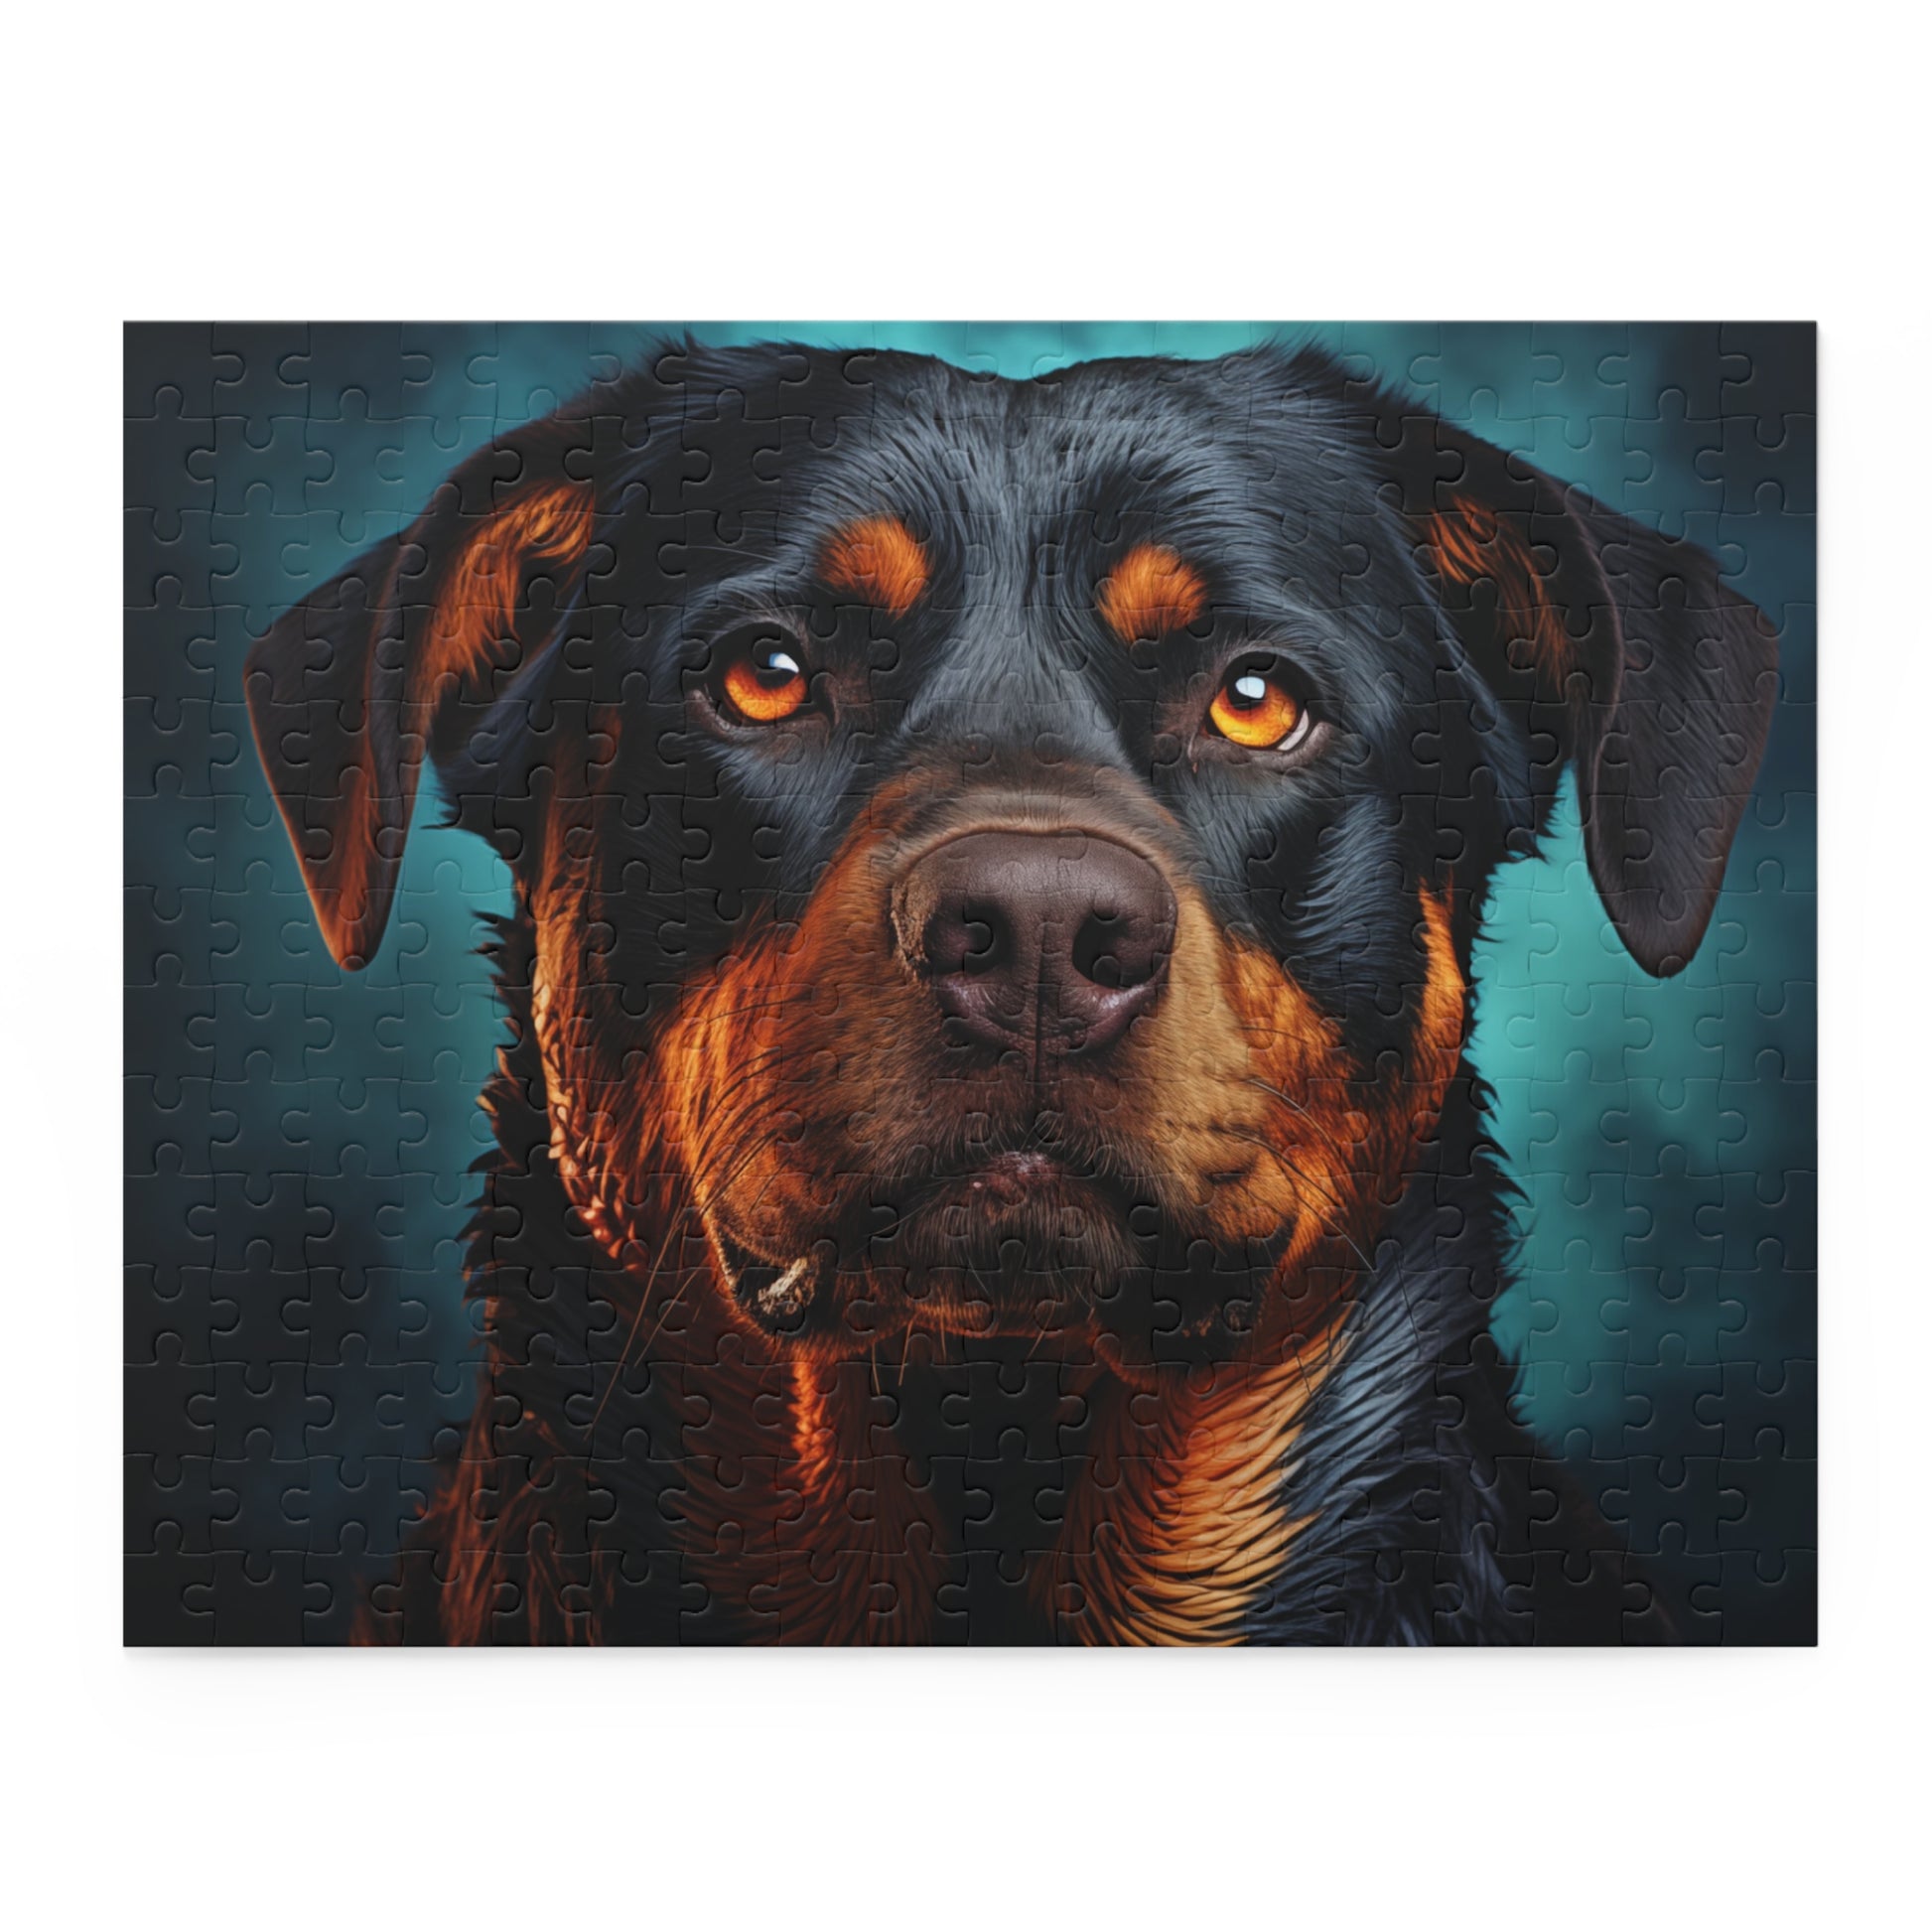 Watercolor Rottweiler Dog Jigsaw Puzzle Oil Paint for Boys, Girls, Kids Adult Birthday Business Jigsaw Puzzle Gift for Him Funny Humorous Indoor Outdoor Game Gift For Her Online-3